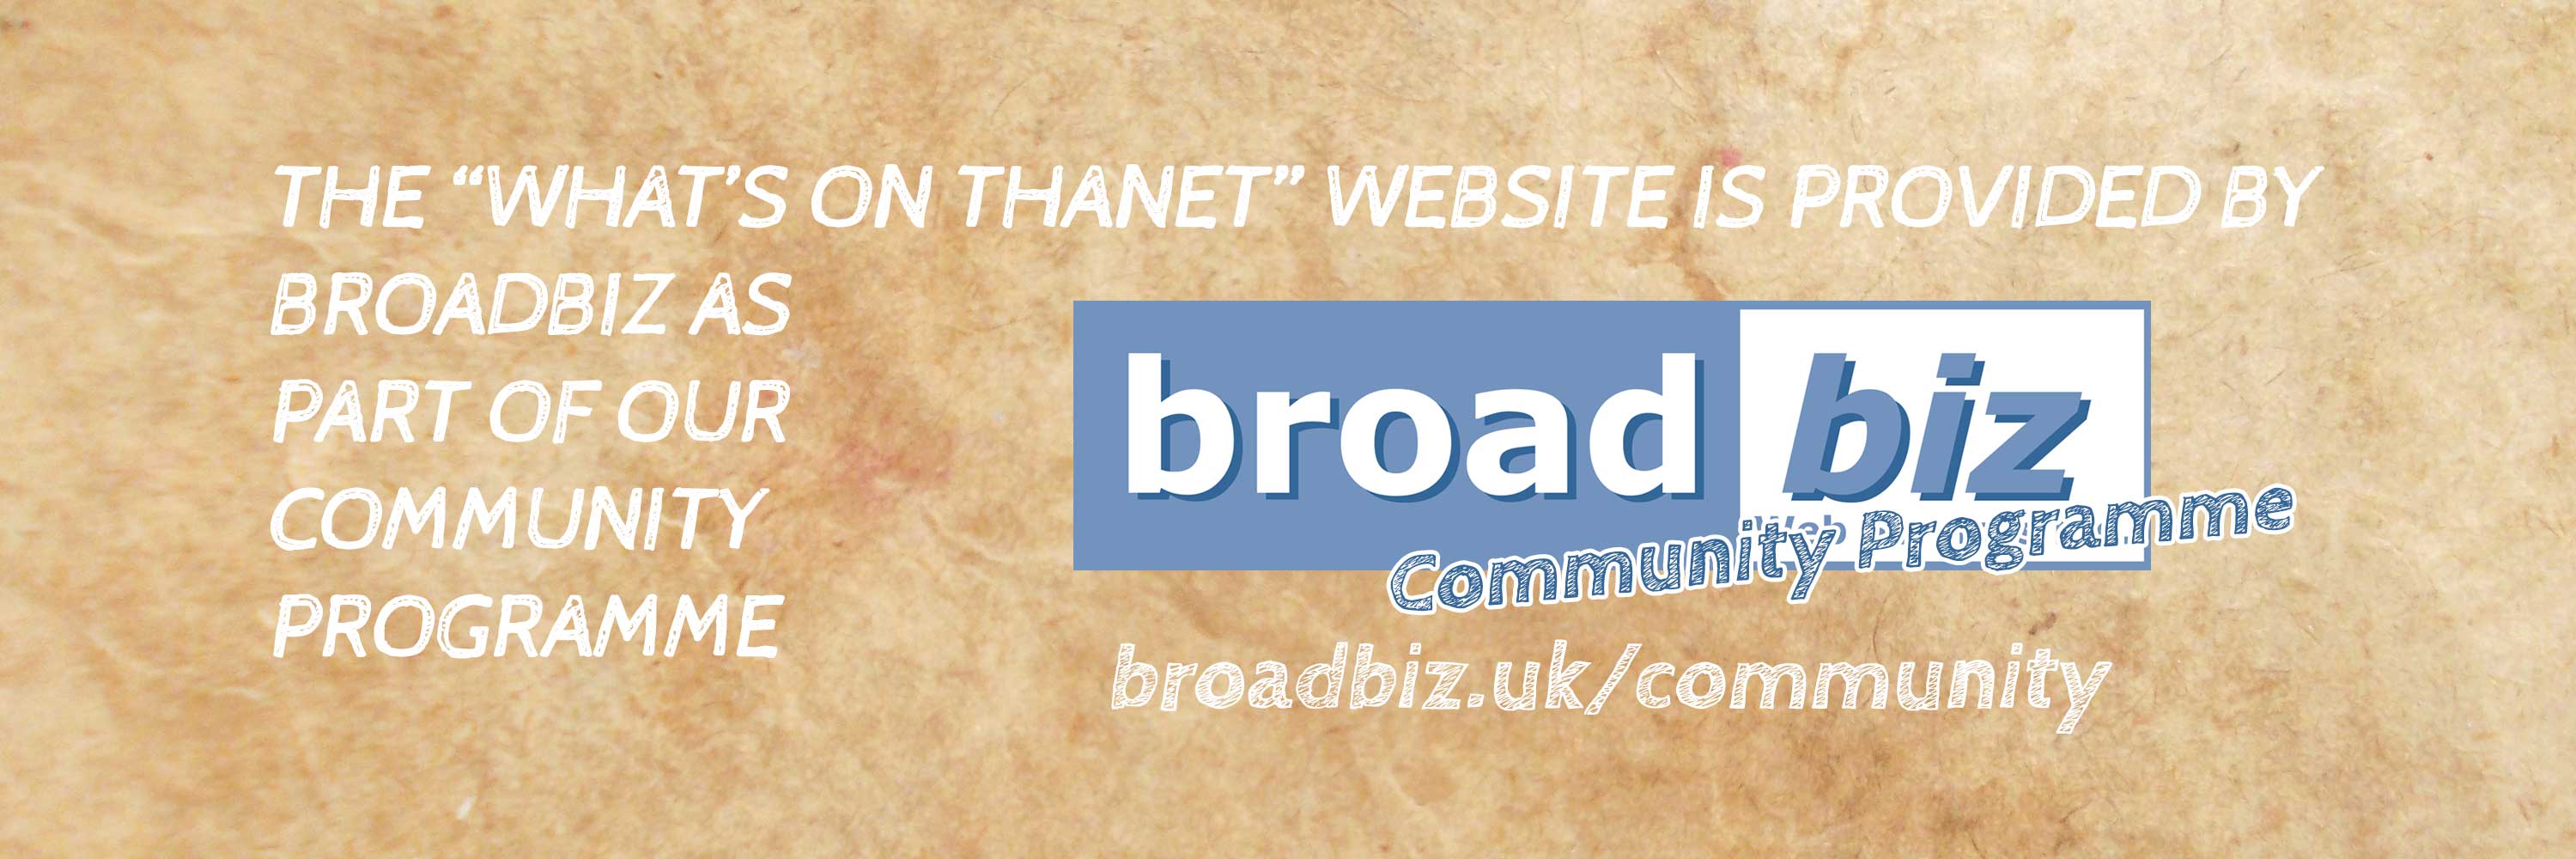 The What's On Thanet website is provided by Broadbiz as part of our Community Programme